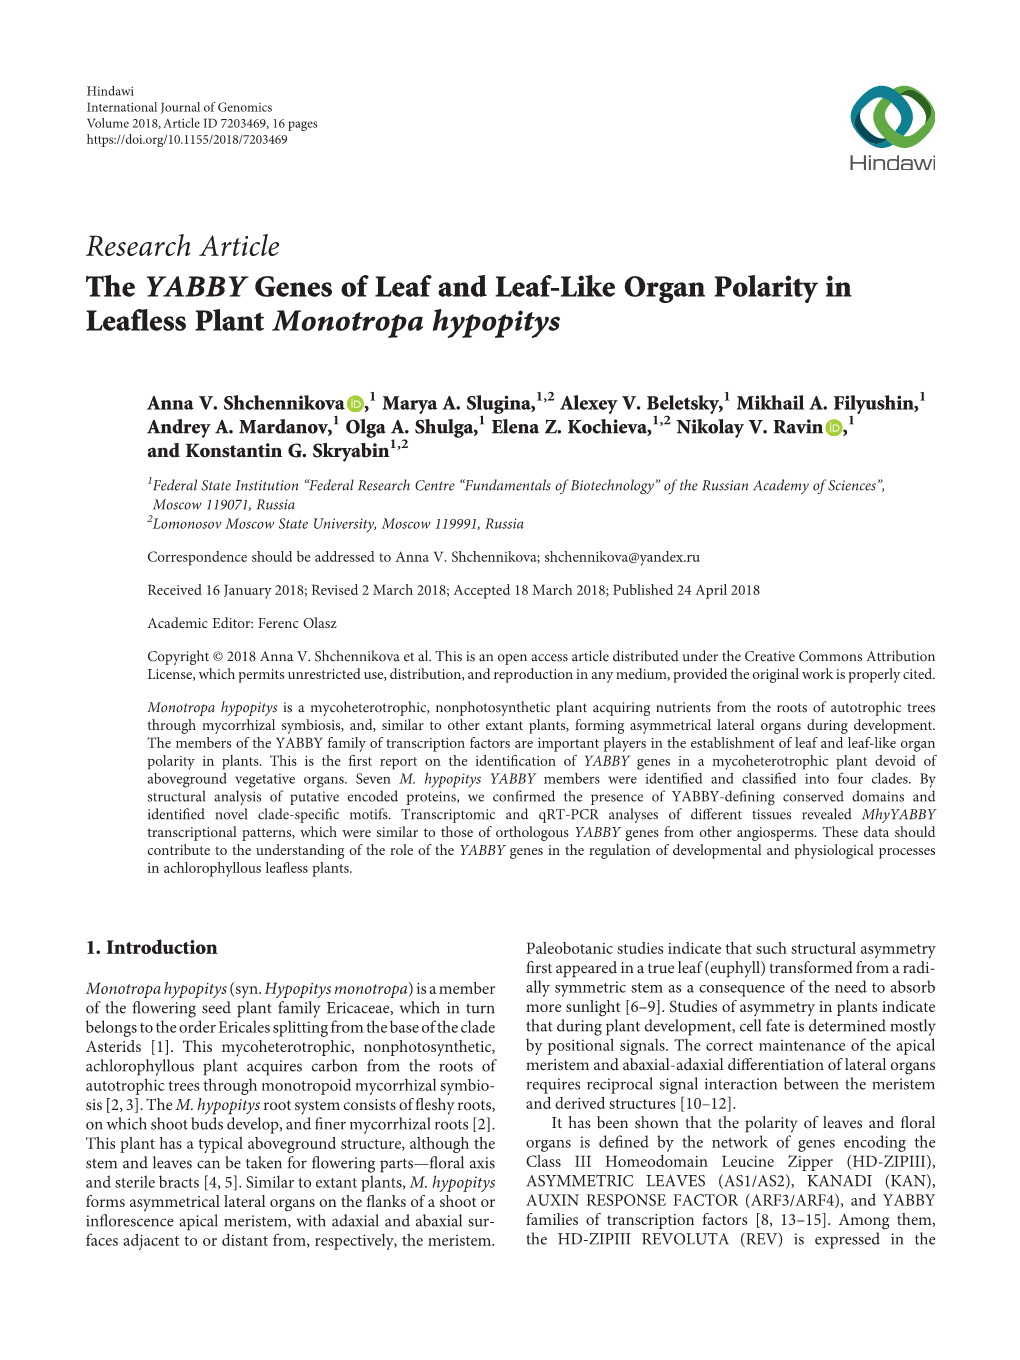 The YABBY Genes of Leaf and Leaf-Like Organ Polarity in Leafless Plant Monotropa Hypopitys